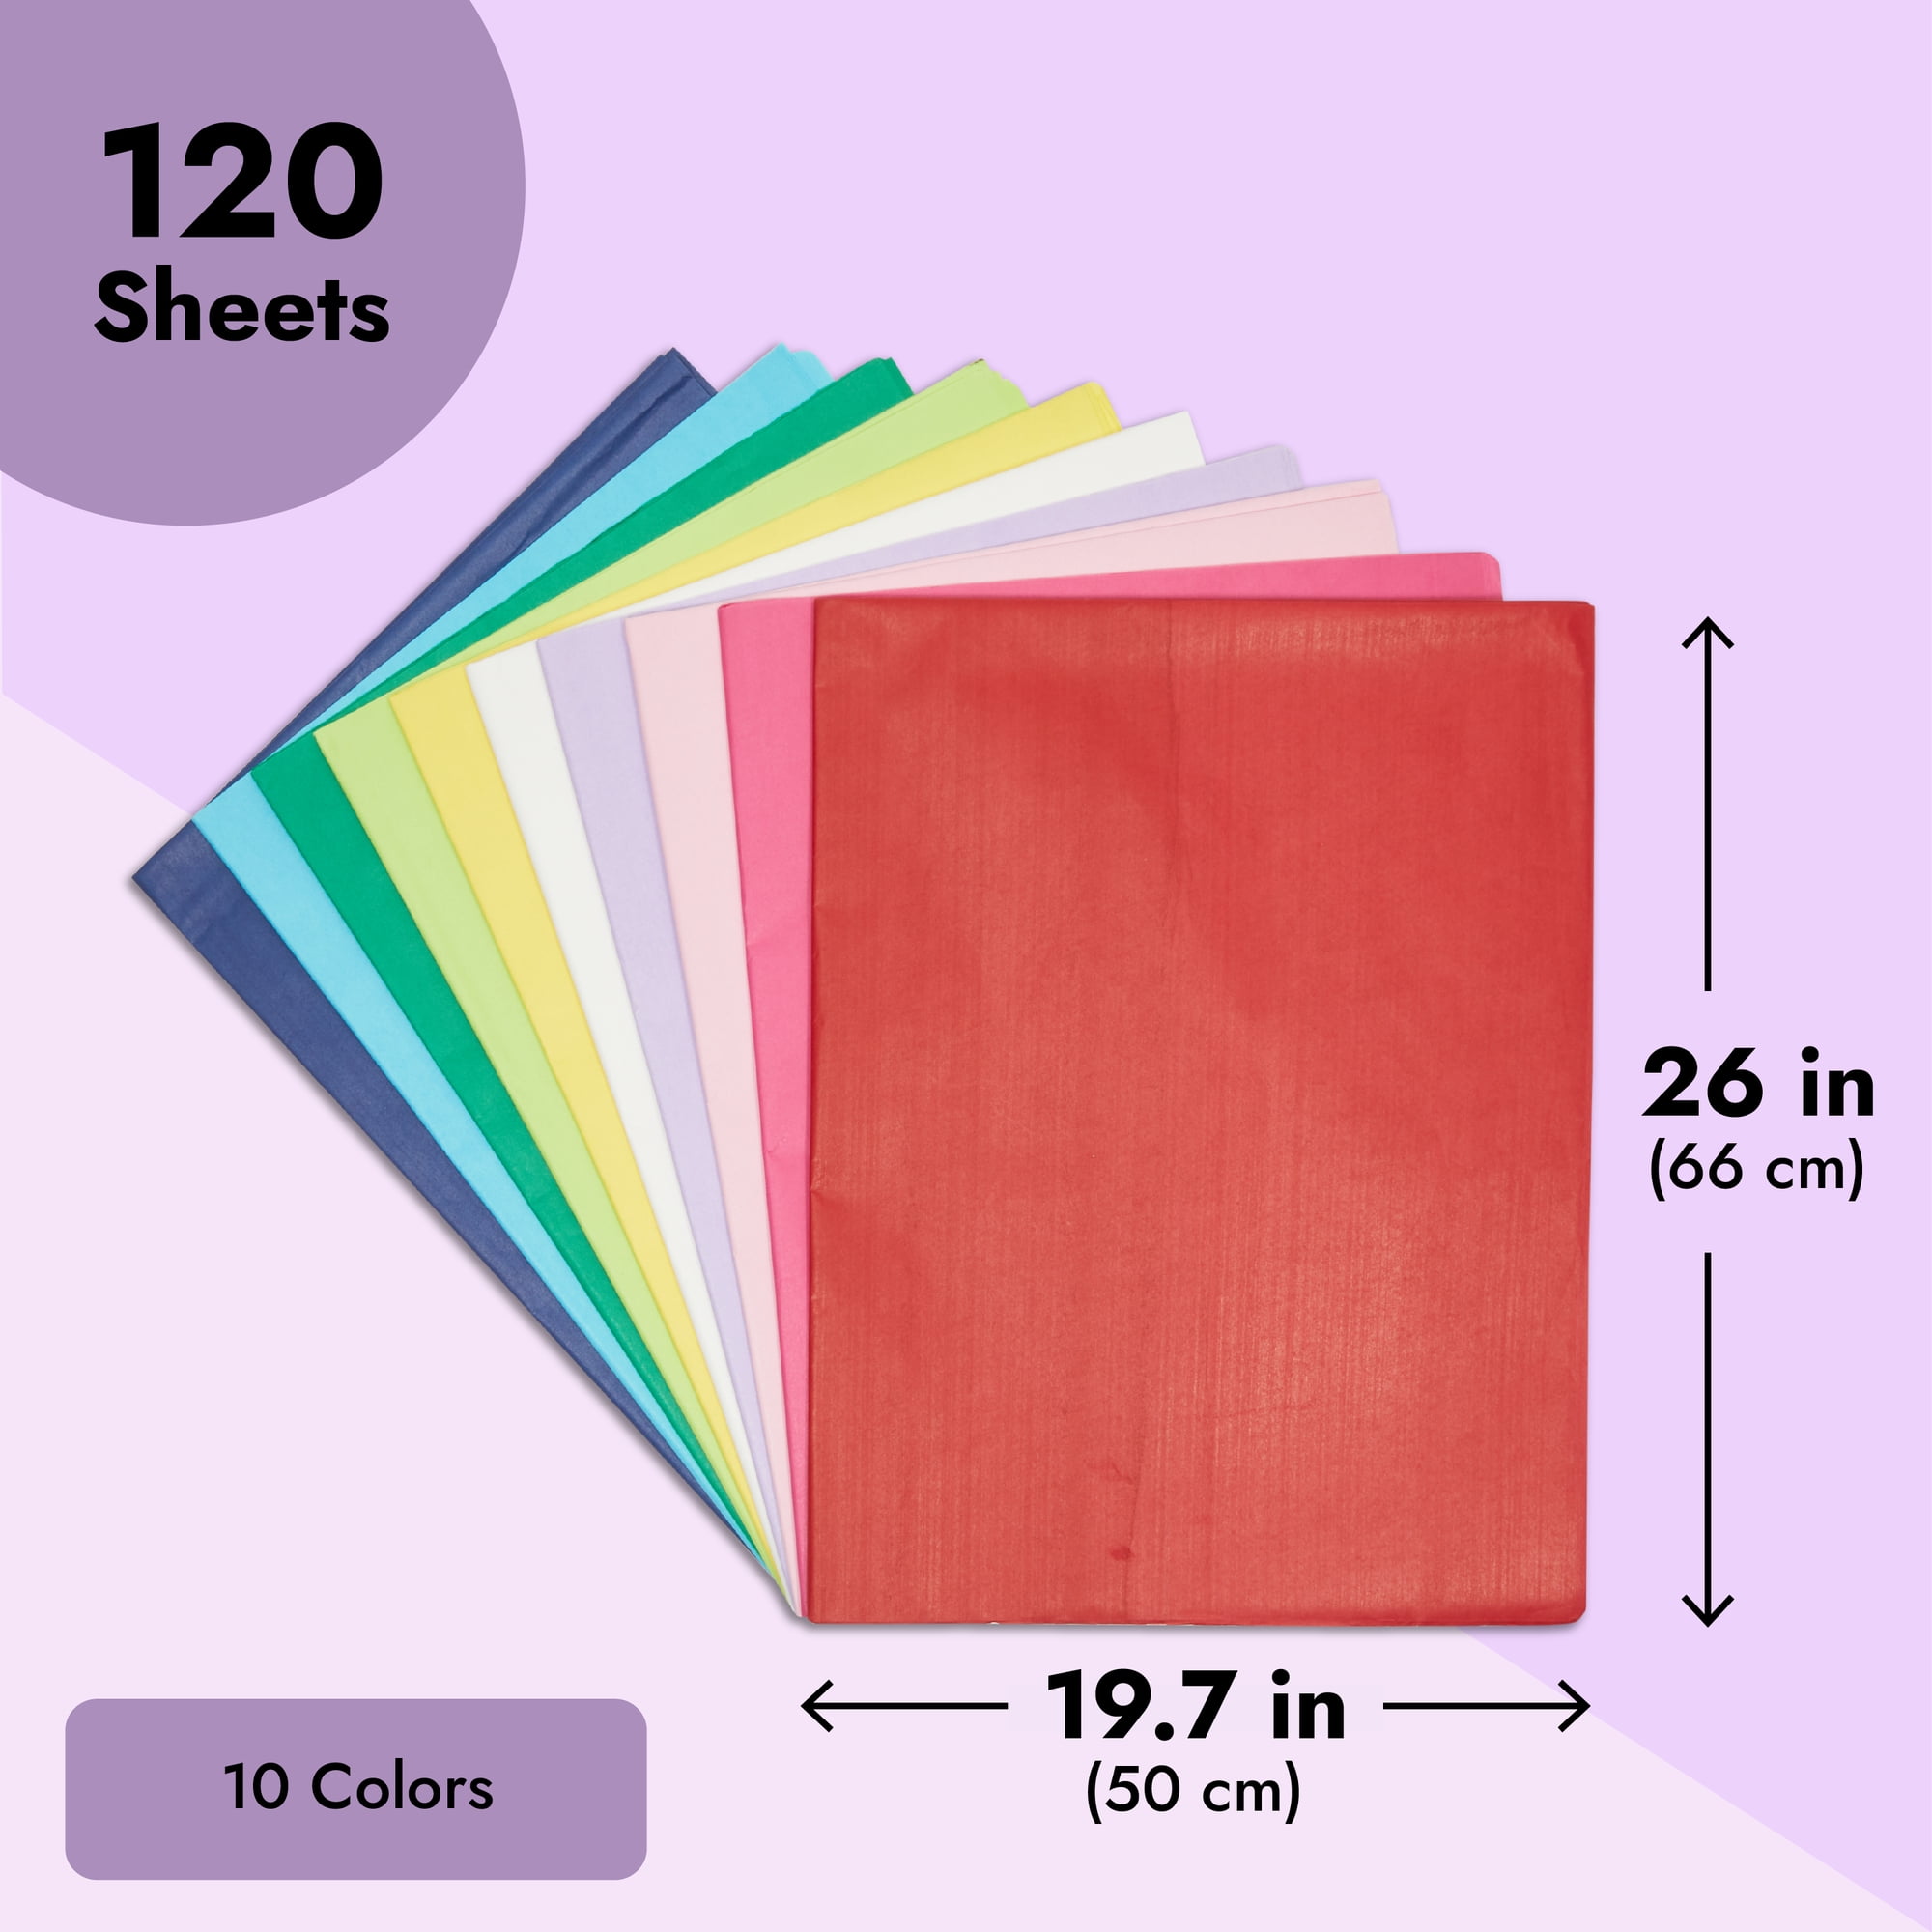 Frosted Craft Tissue Paper 12x12 20/Pkg Melon-Pinks